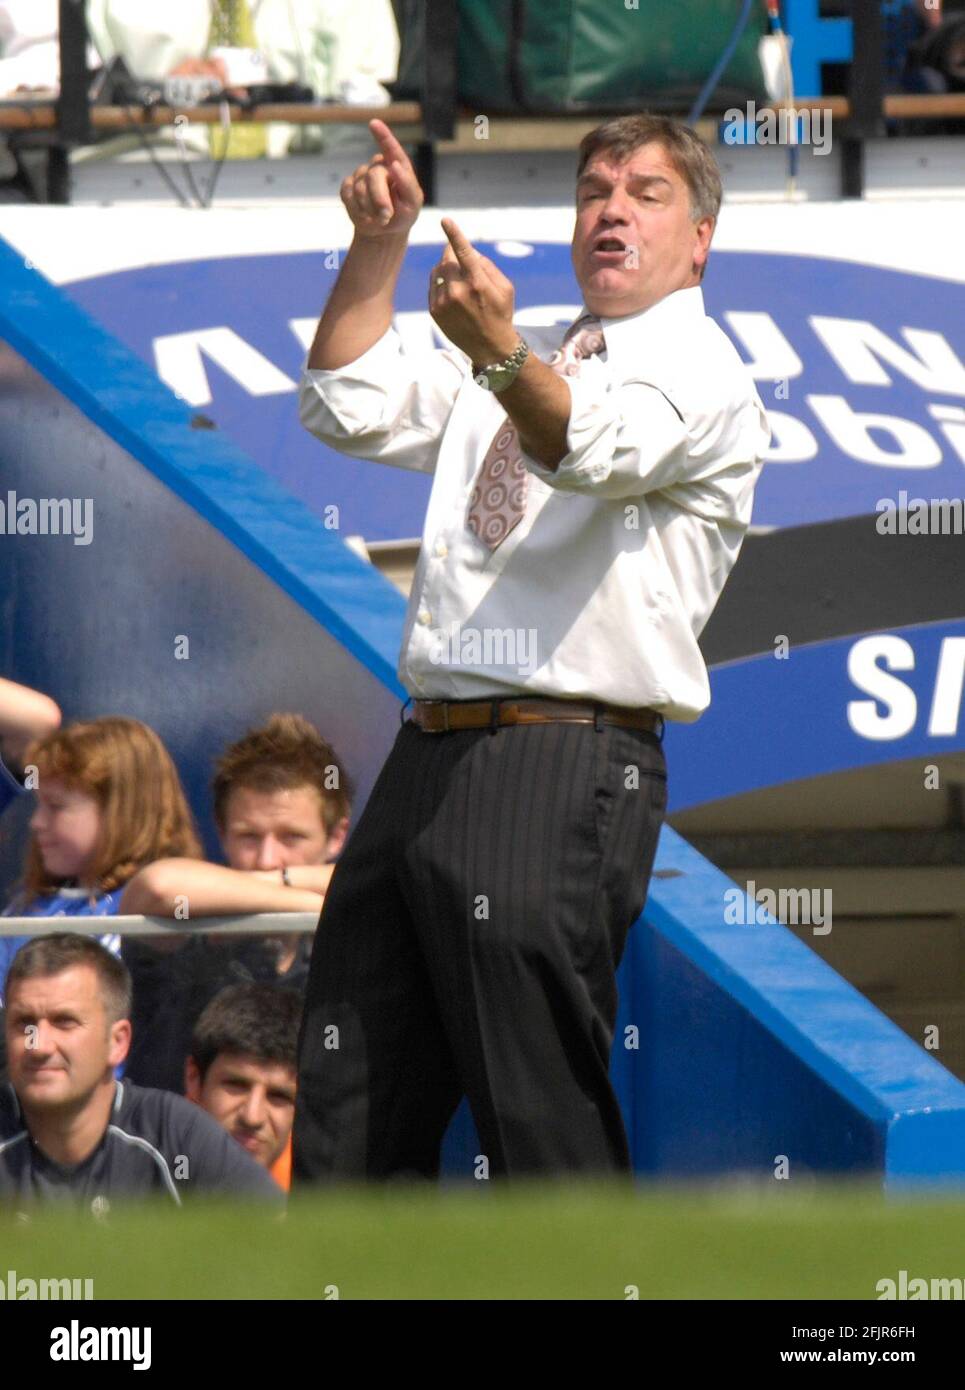 CHELSEA V BOLTON. SAM ALLARDYCE THE BOLTON MANAGER DURING HIS FINAL GAME IN CHARGE.   28/4/07 PICTURE DAVID ASHDOWNPREMIERSHIP FOOTBALL Stock Photo